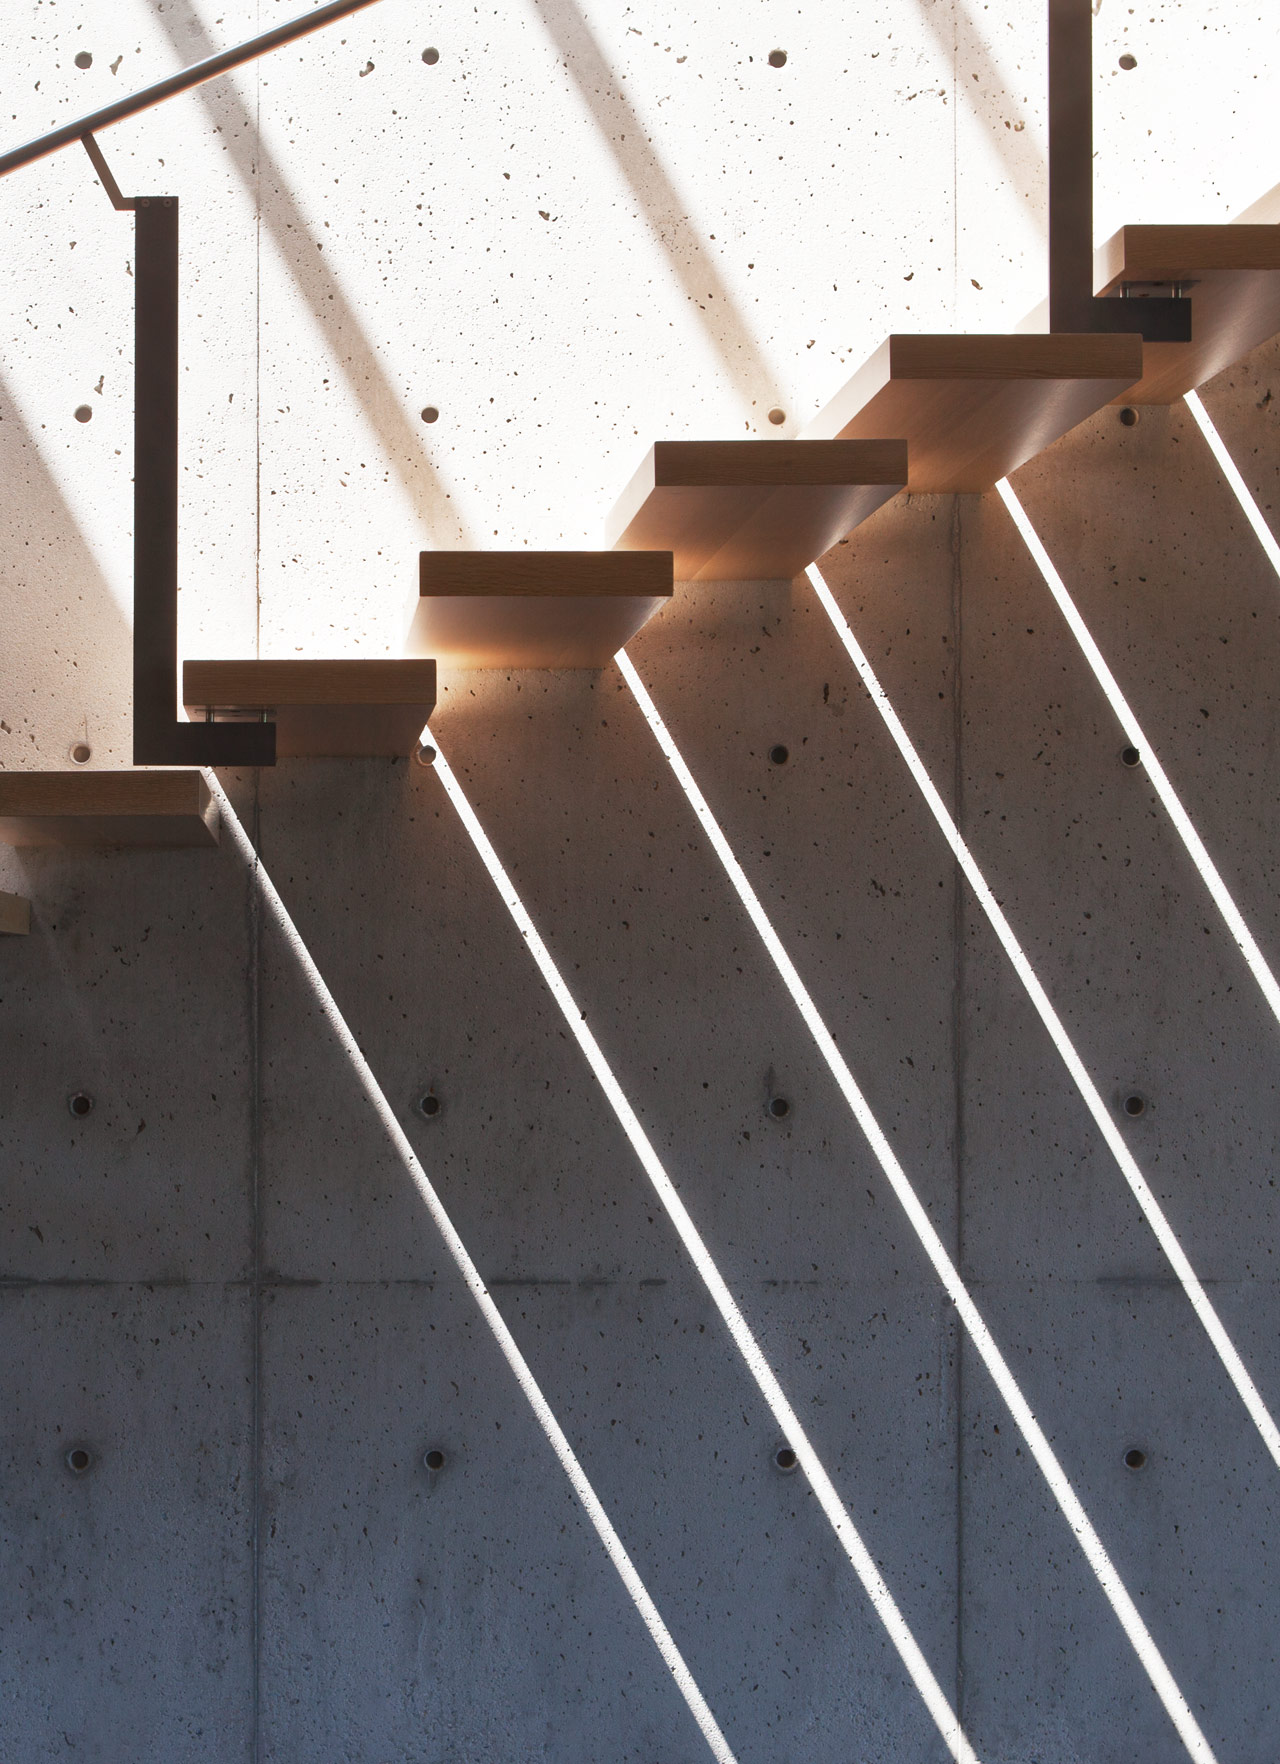 Light shining through slits in floating wood staircase against concrete wall.